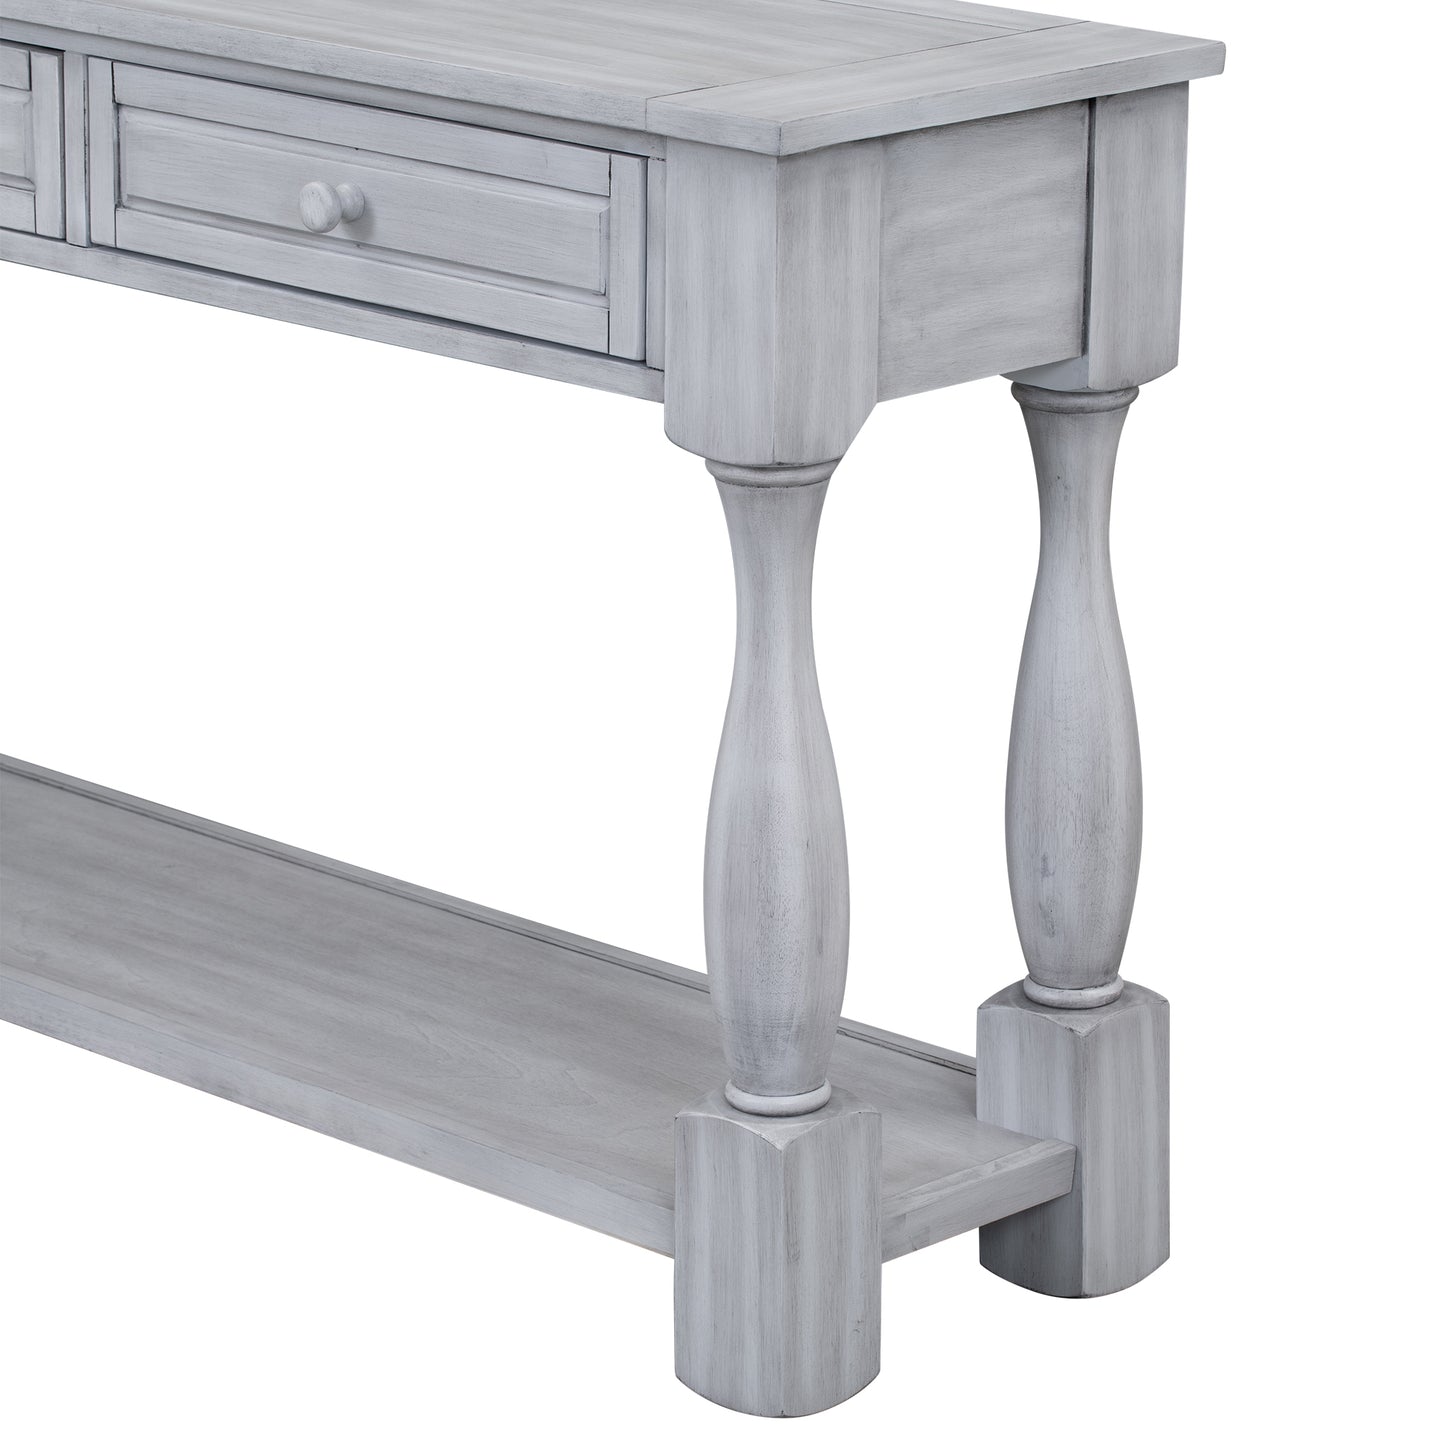 Console Table with Drawers and Shelf